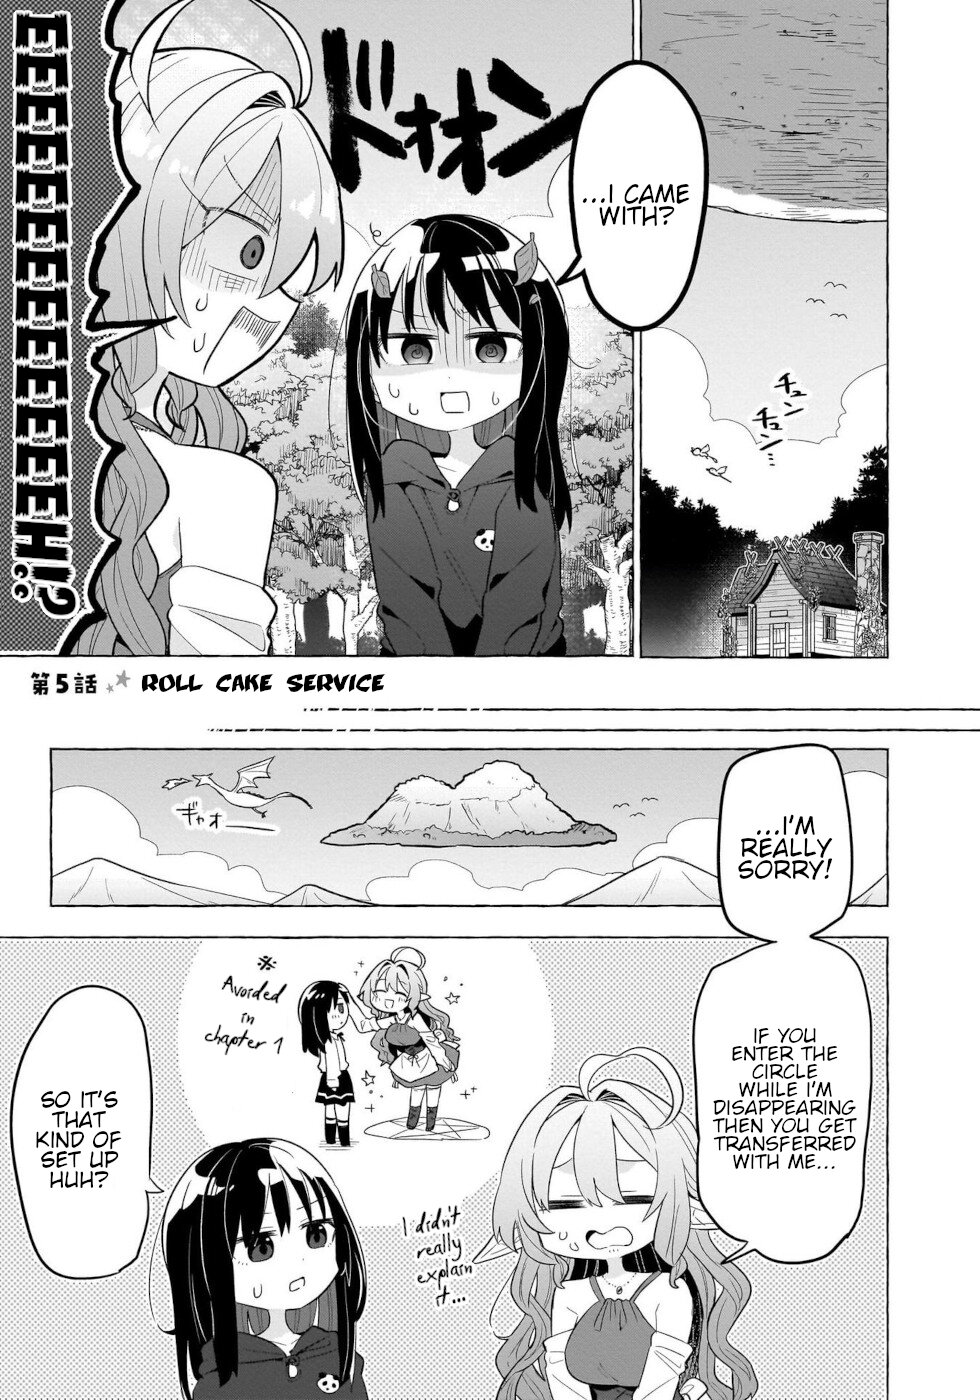 Sweets, Elf, And A High School Girl Vol.1 Chapter 5: Roll Cake Service - Picture 1